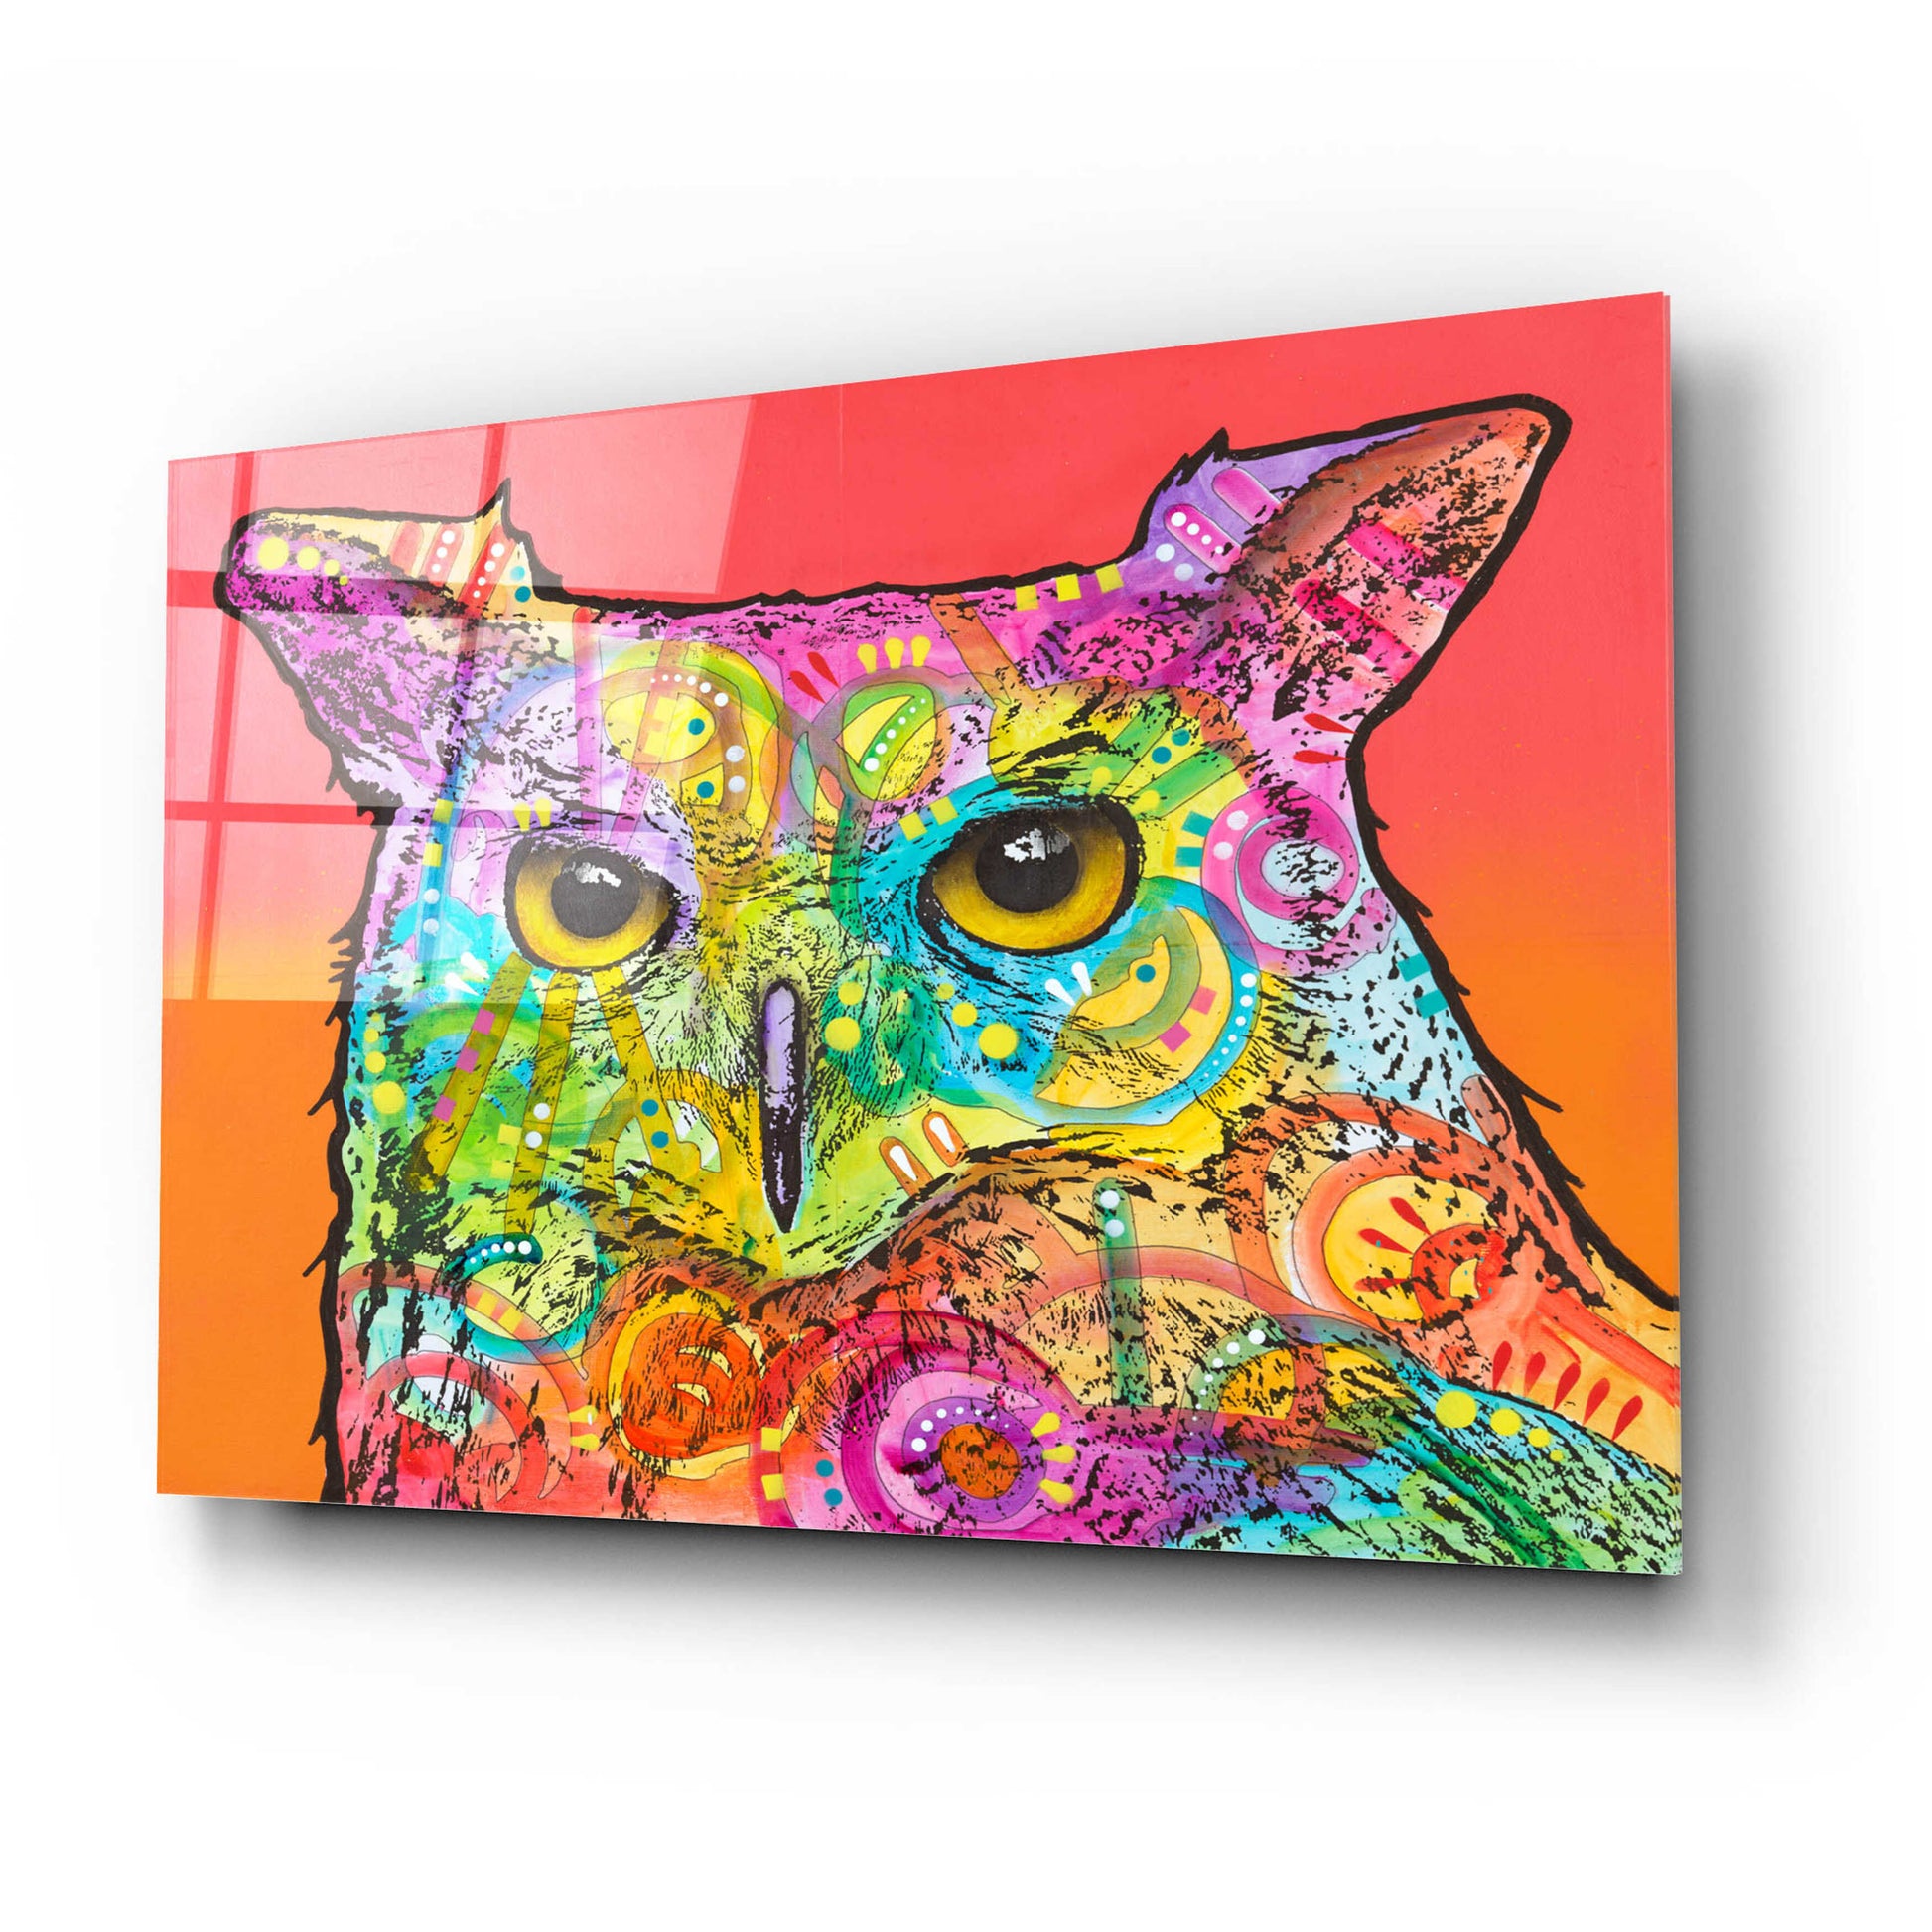 Epic Art 'Red Owl' by Dean Russo, Acrylic Glass Wall Art,24x16